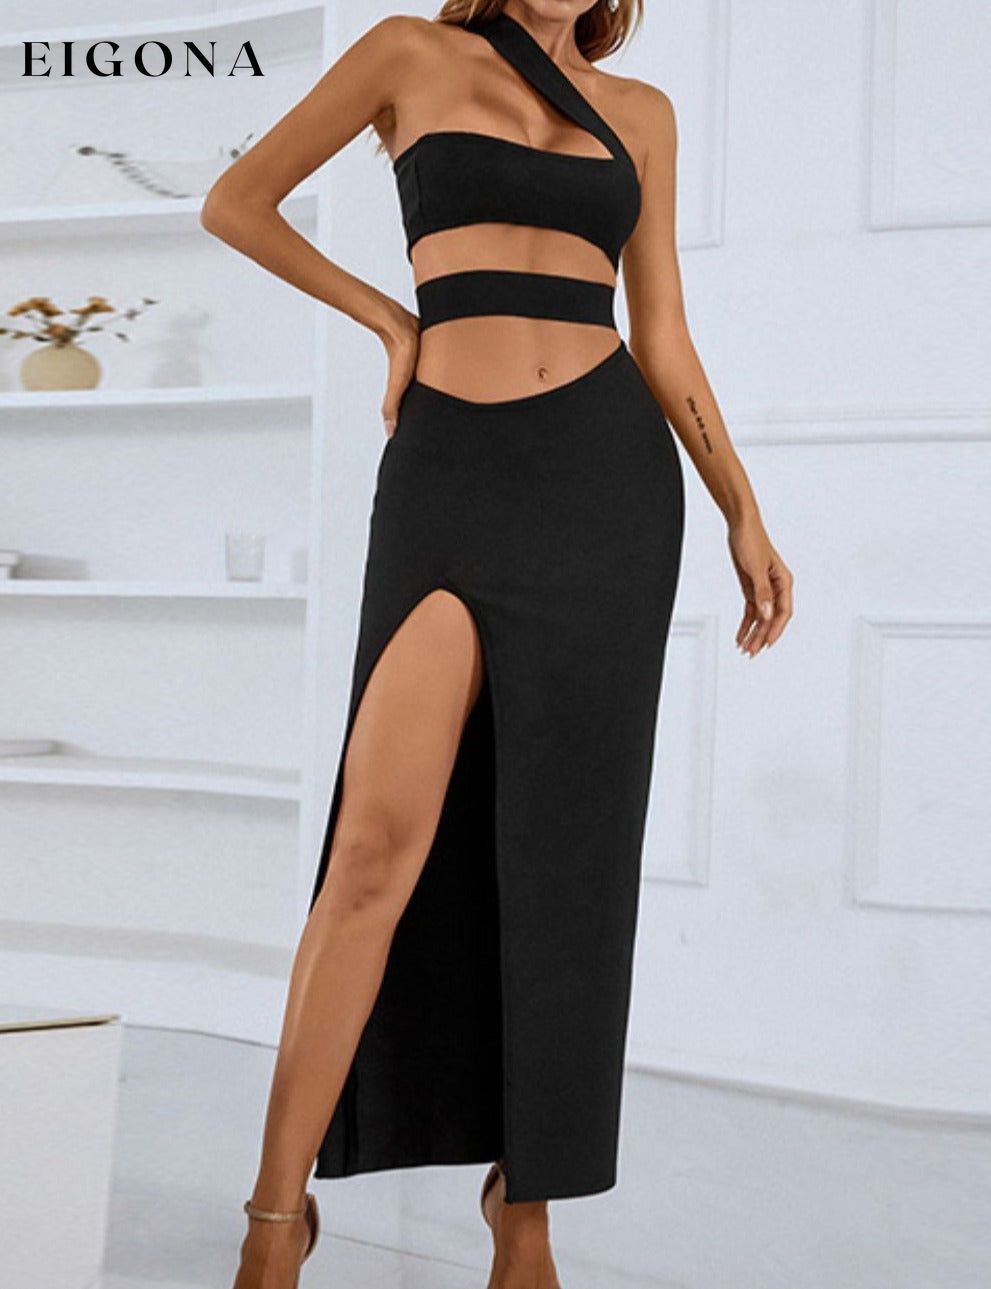 One-Shoulder Sexy Cutout Front Split Maxi Dress Black body con clothes cocktail dresses cut out dresses dress dresses evening dress evening dresses maxi dress maxi dresses midi dress midi dresses NF Ship From Overseas trend